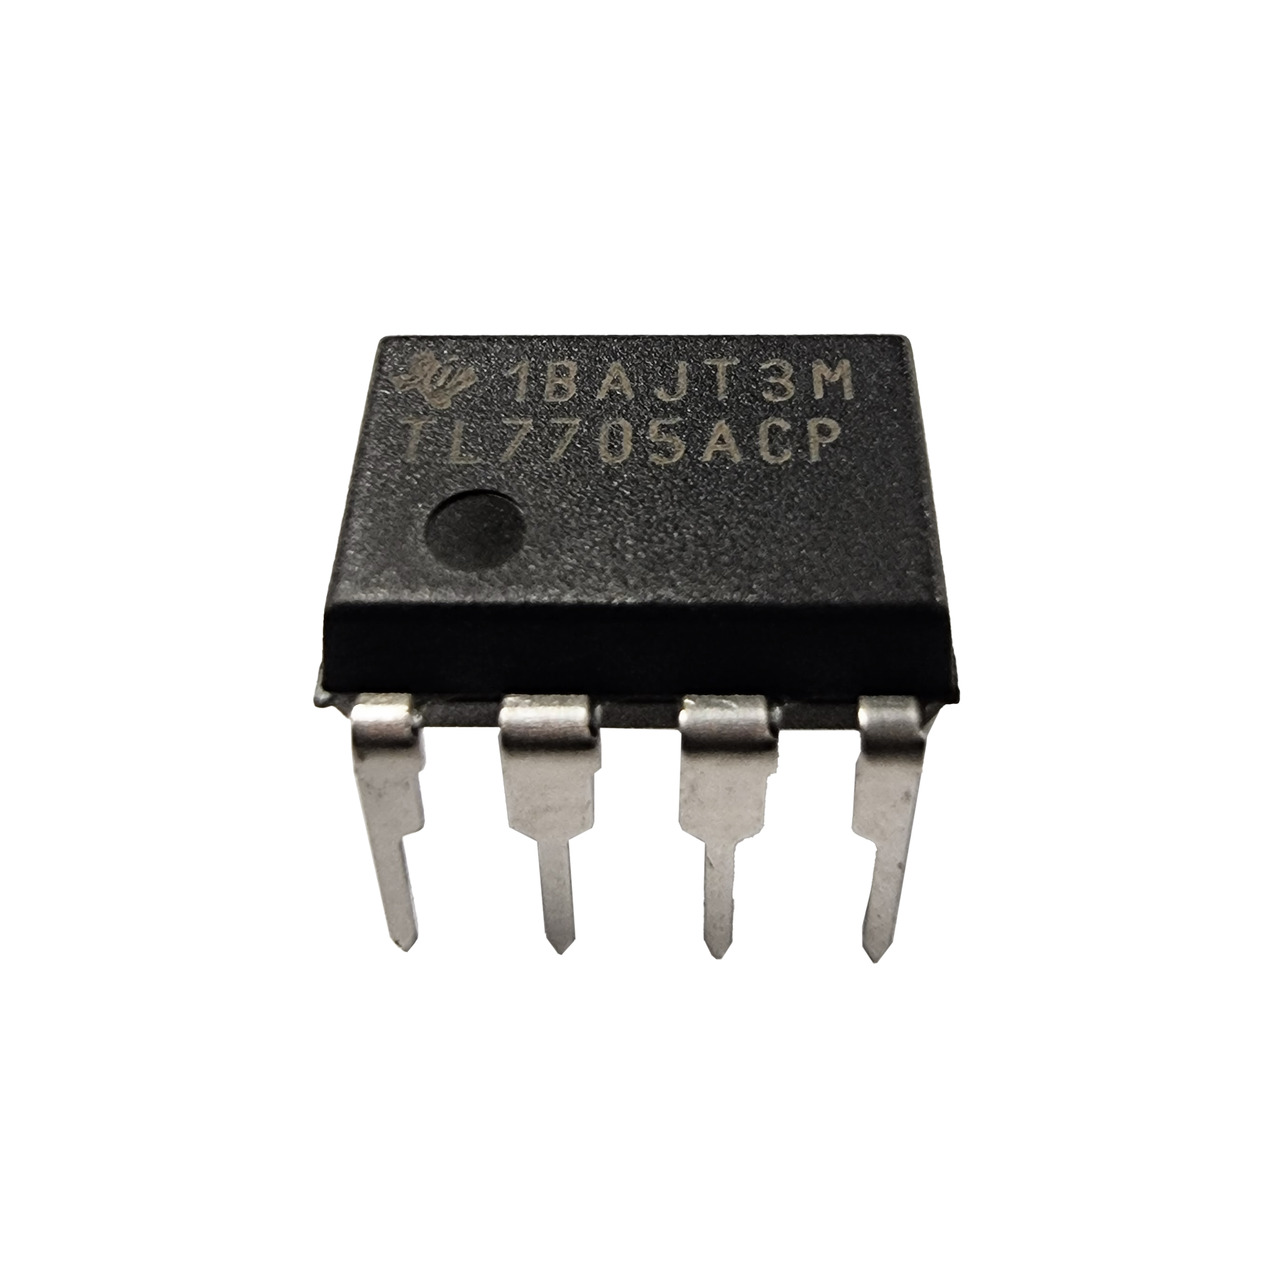 ON Semiconductor Unterspannungssensor MC33164P-3- 2-552-80 V- TO92